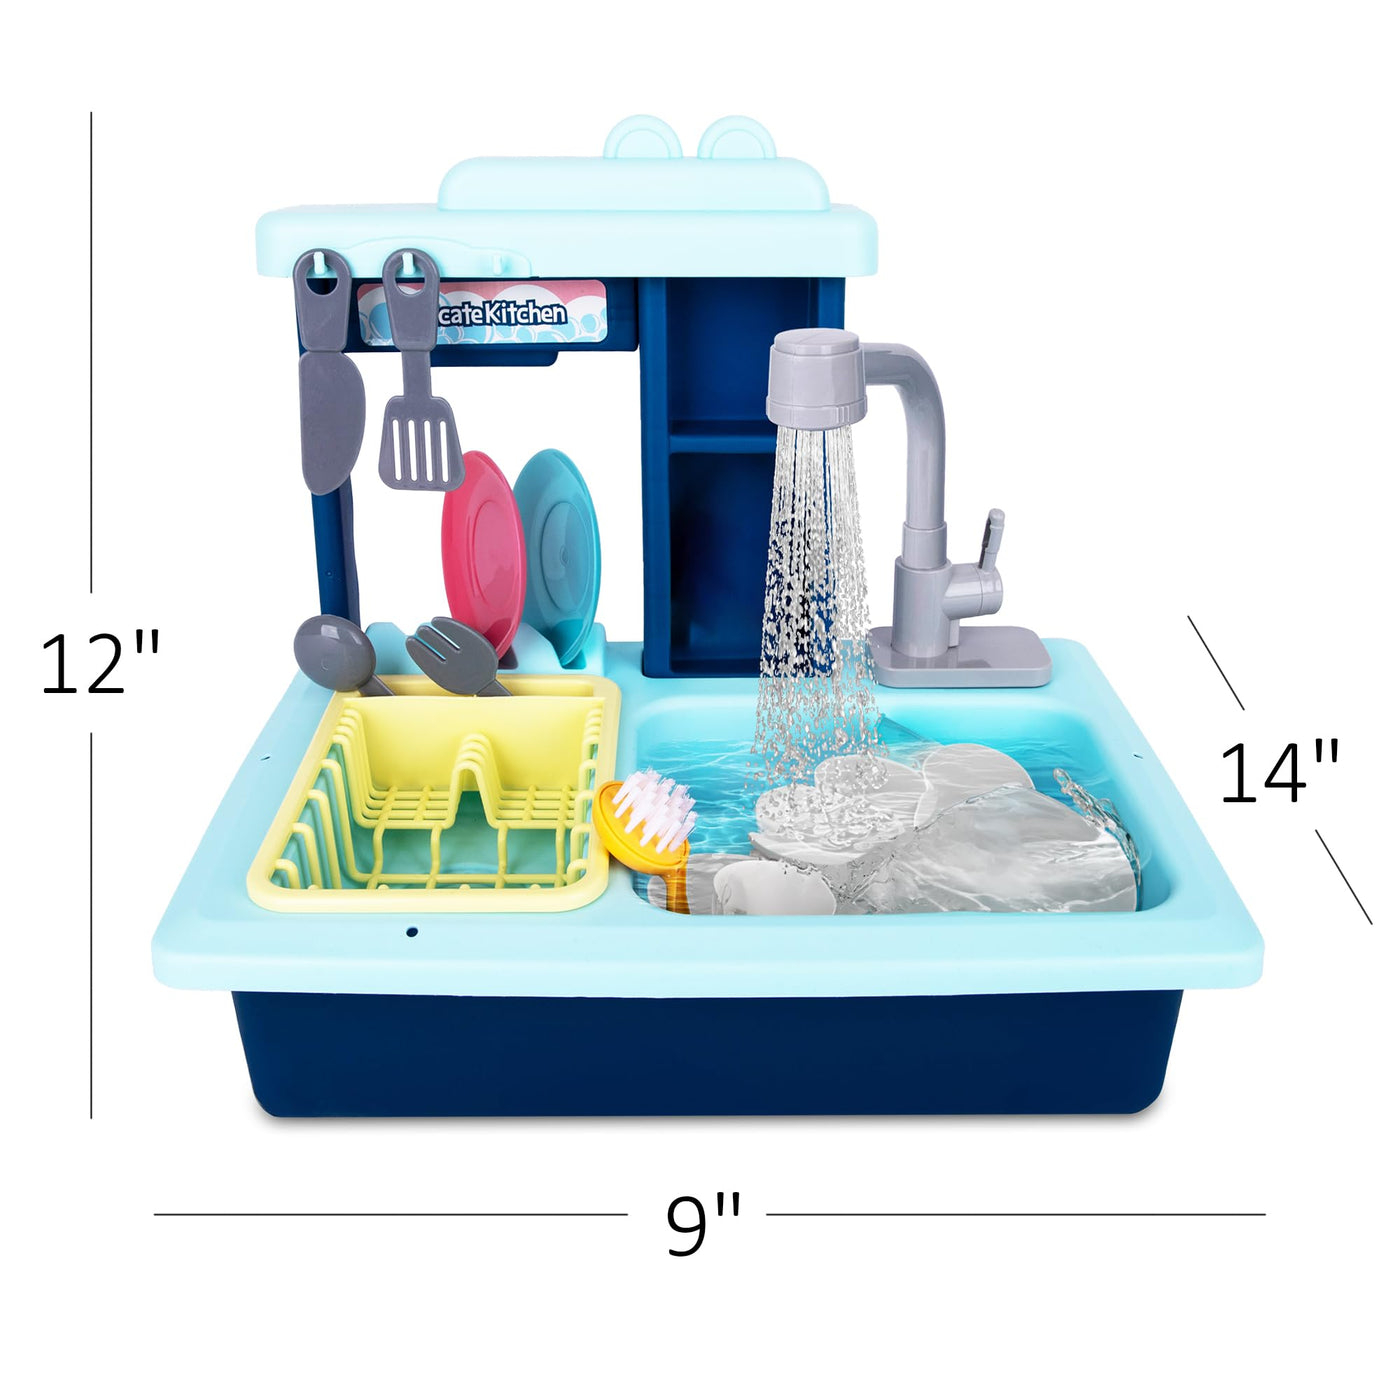 Sink Toy with Running Water and Color Changing Dishes - 22 Piece Kids Kitchen Play Set - Pumps Real Water - Play Kitchen Sink with Drying Rack, Dishes, Toy Detergent Bottle - Ages 3 4 5